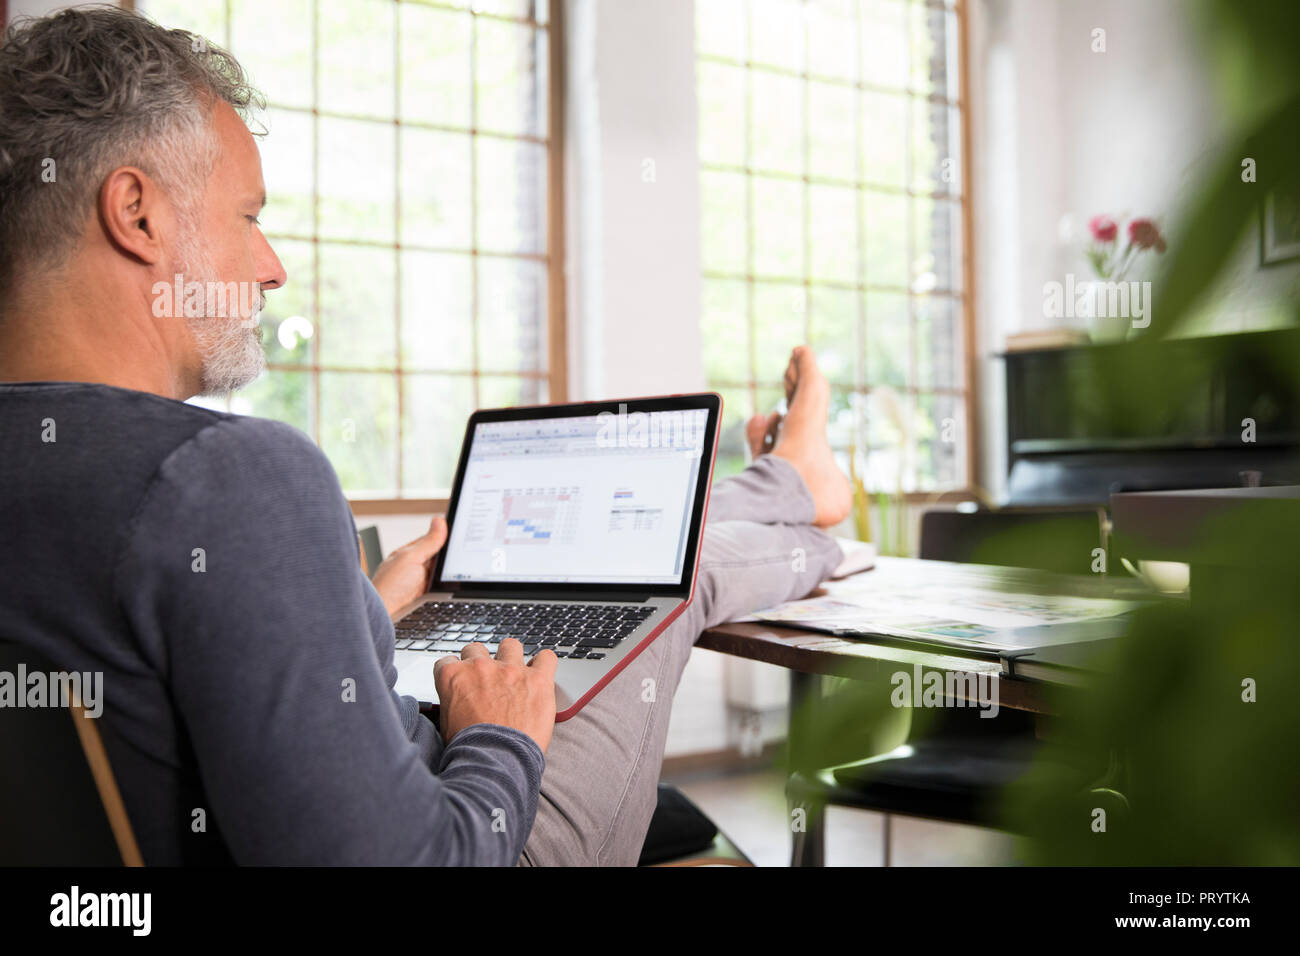 Mature man working from his home office with feet up, using laptop Stock Photo